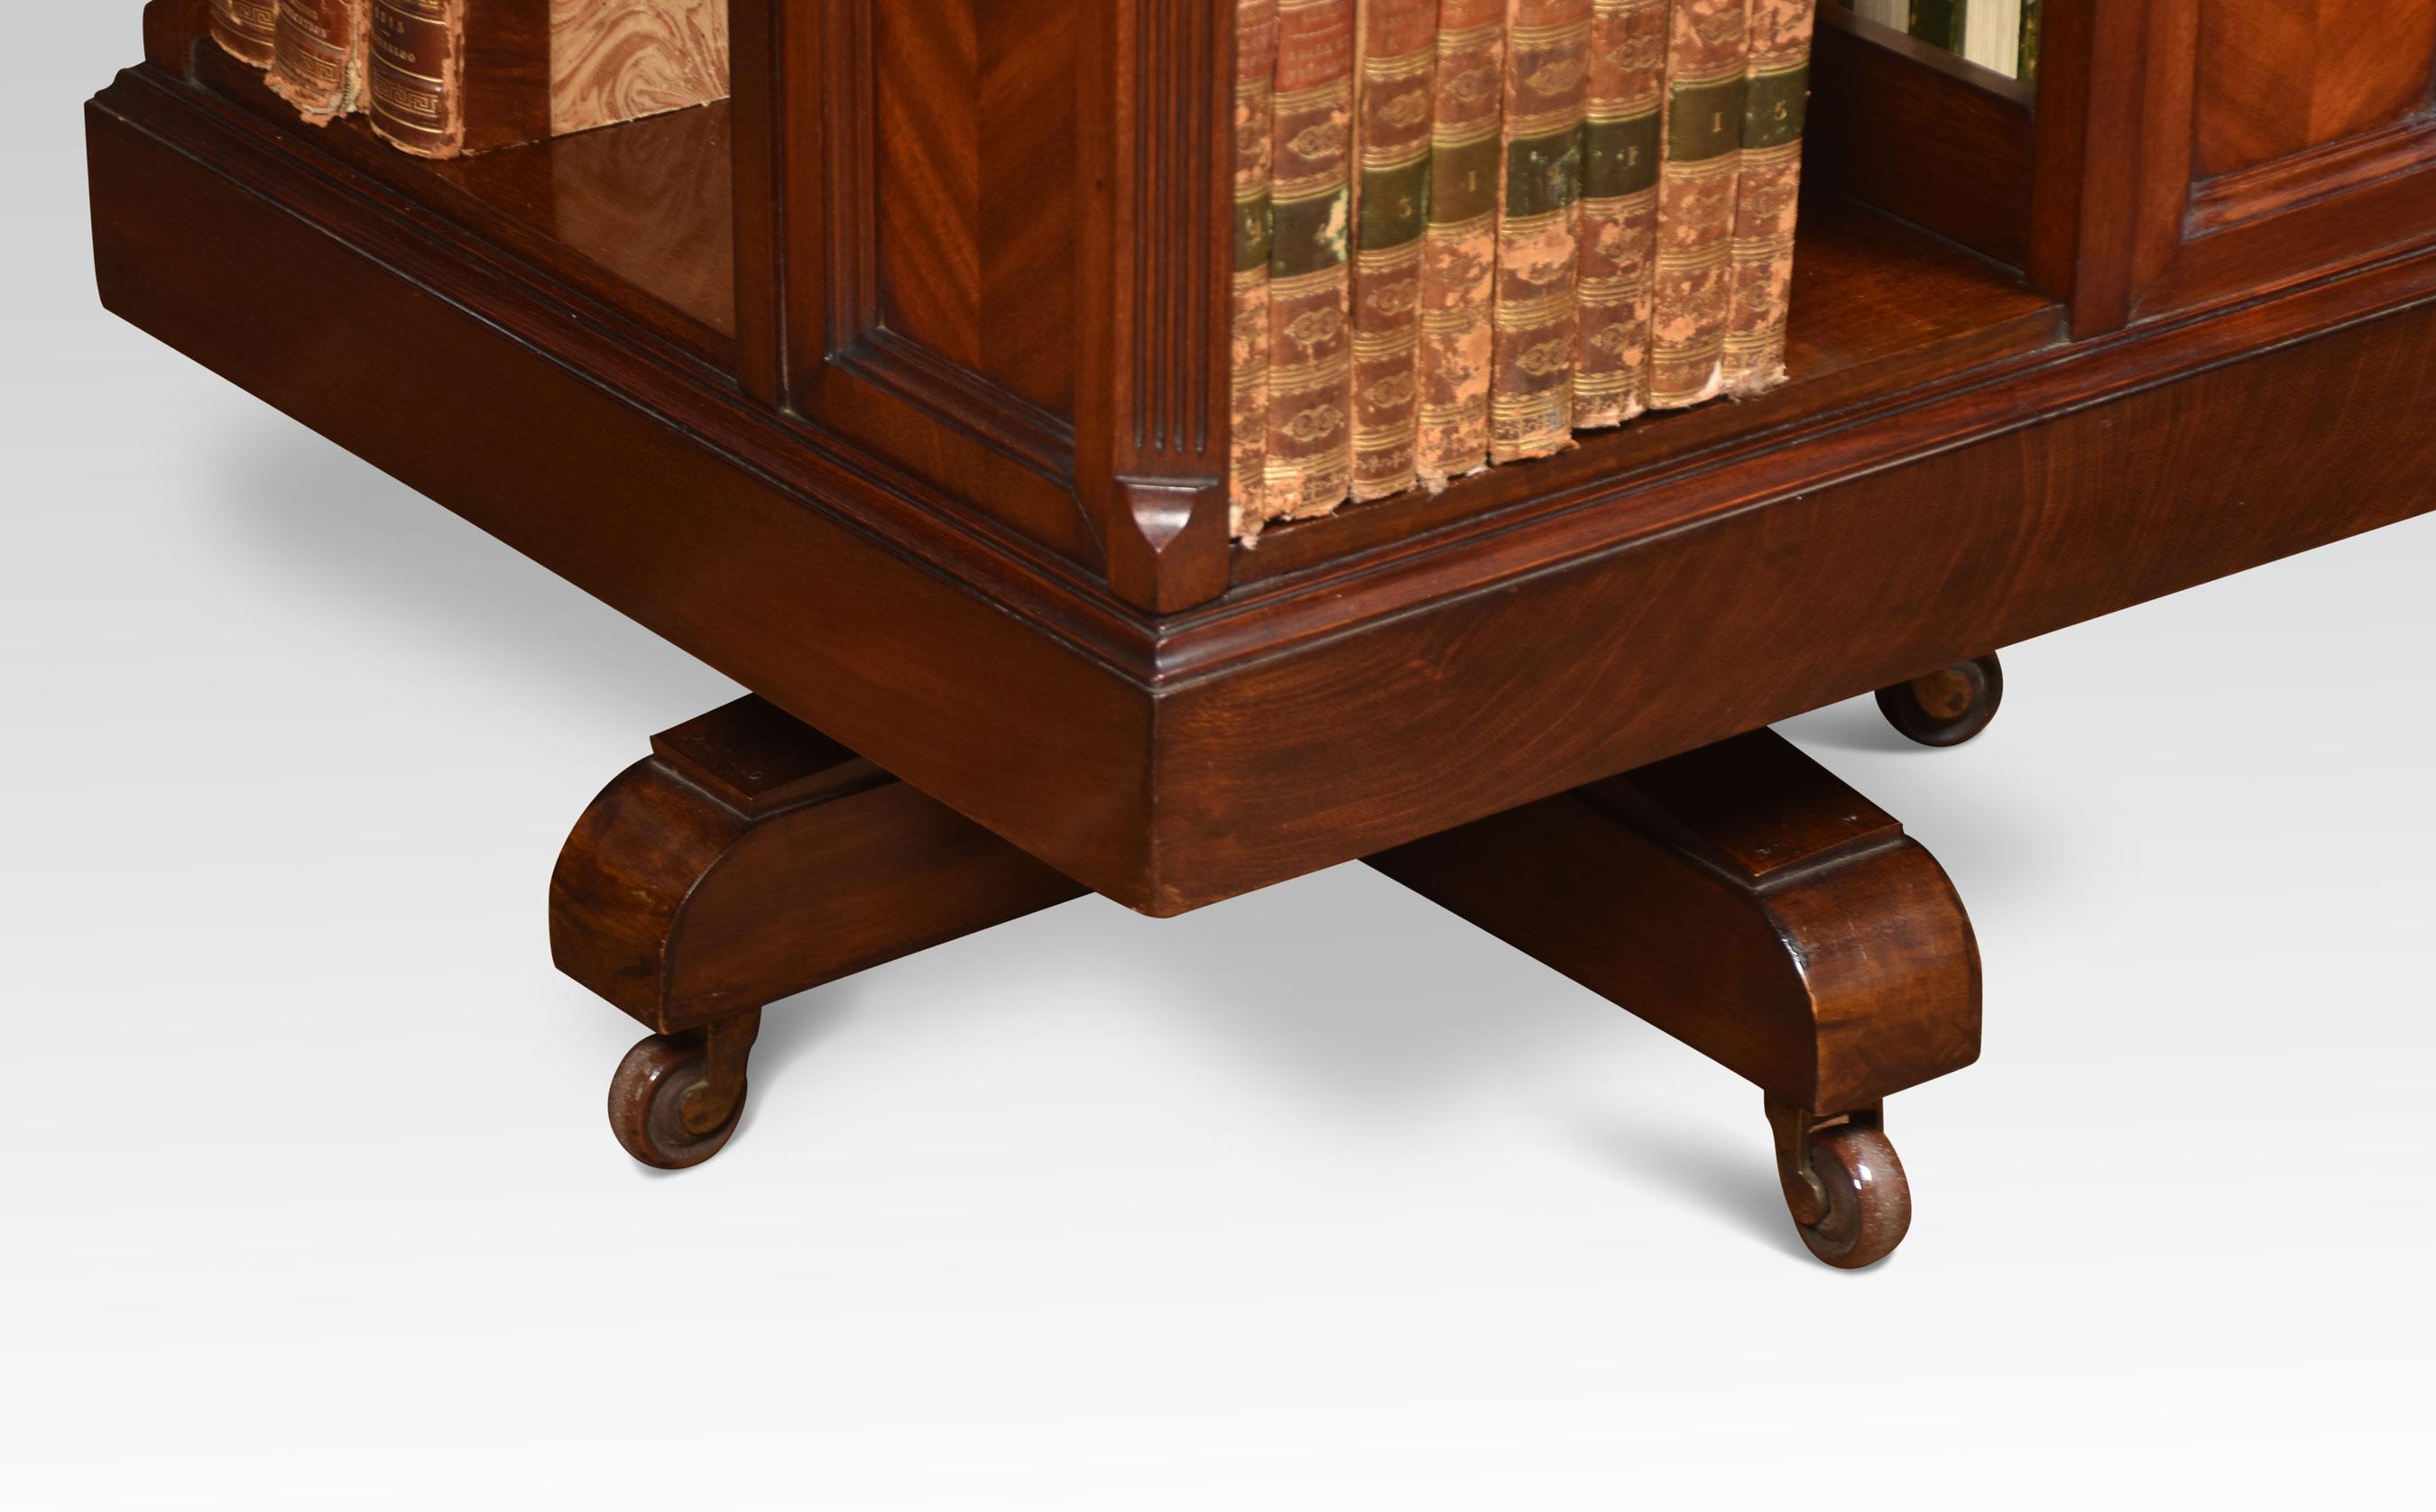 Edwardian inlaid revolving bookcase, the flame mahogany top with banded edge. Above an arrangement of shelves. Supported on flame mahogany inlaid panels, all raised up on cruciform base with original brass castors.
Dimensions
Height 34.5